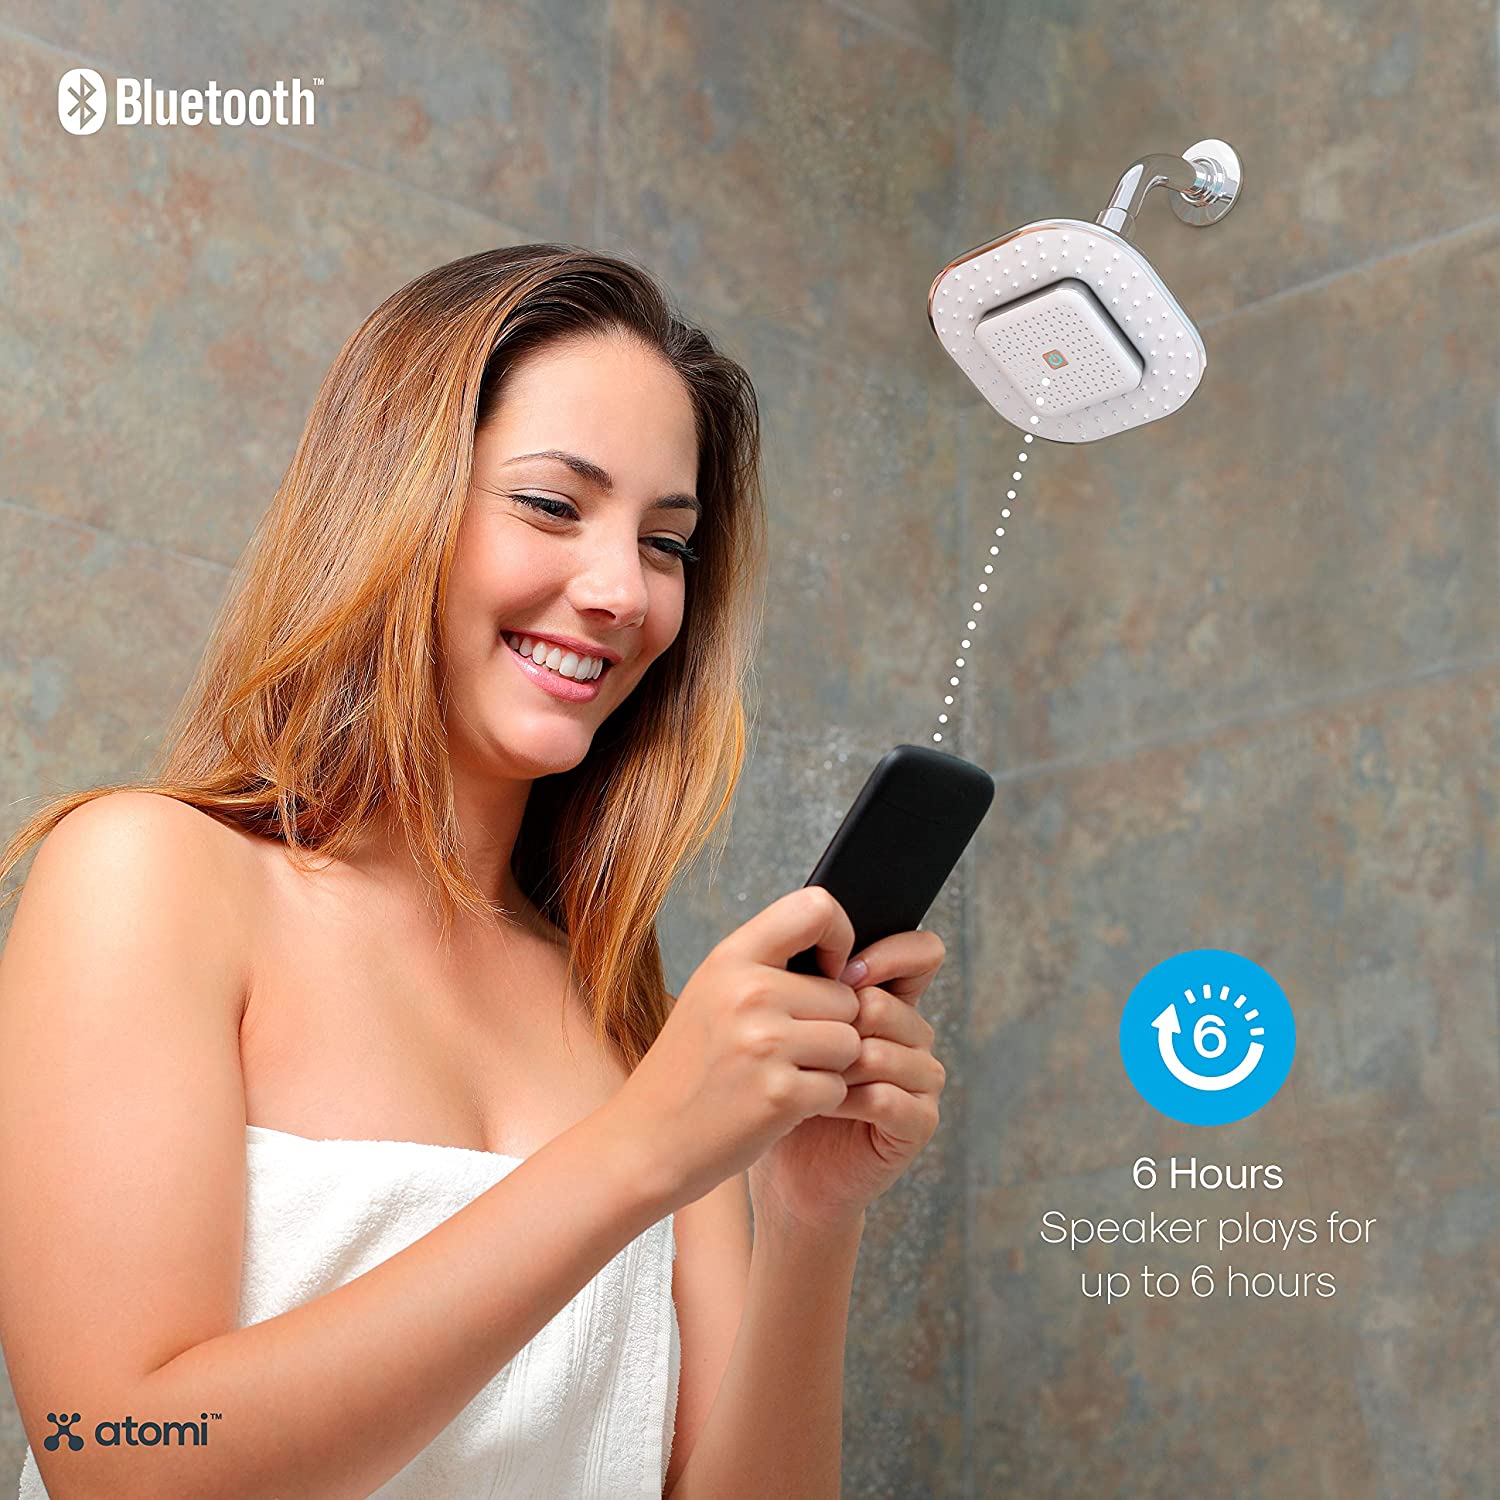 Atomi 4.9” White Showerhead With Removable, Magnetic Bluetooth Speaker – AT1490, 1 Pk - image 7 of 8